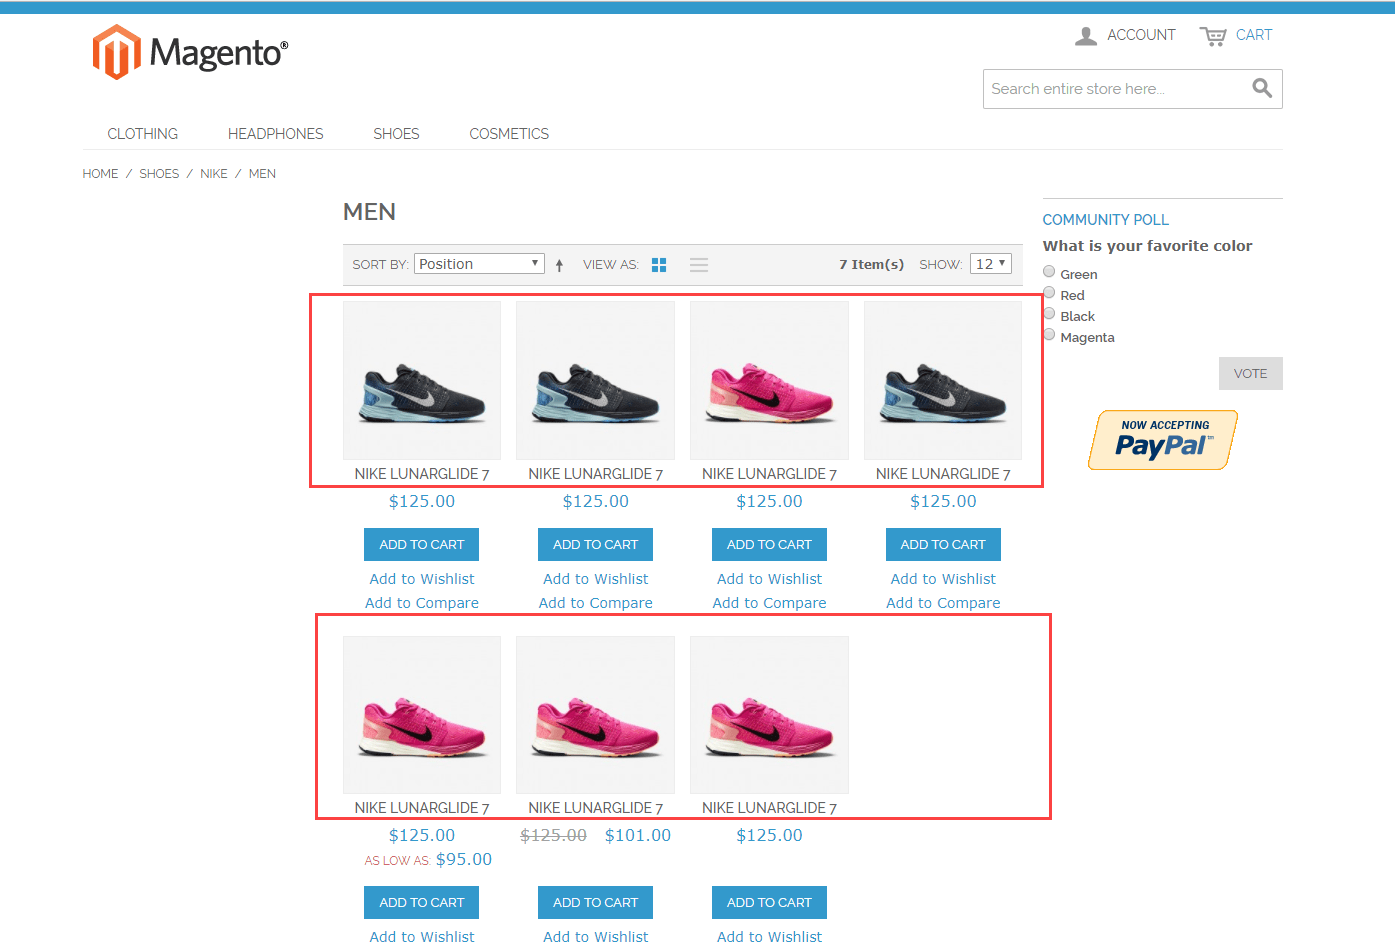 Scrape product images to import into your site